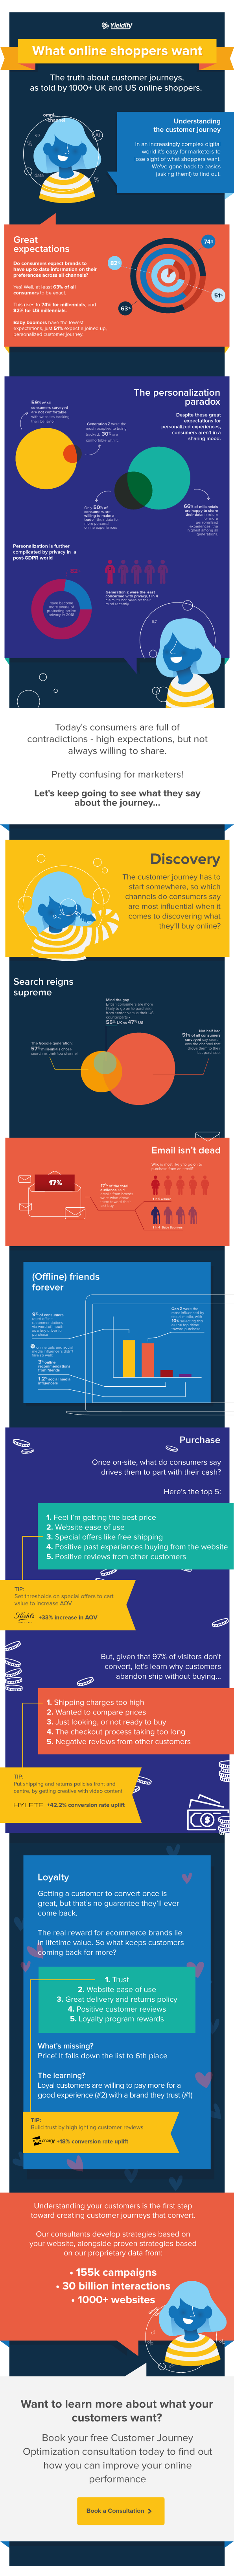 online shopping trends infographic